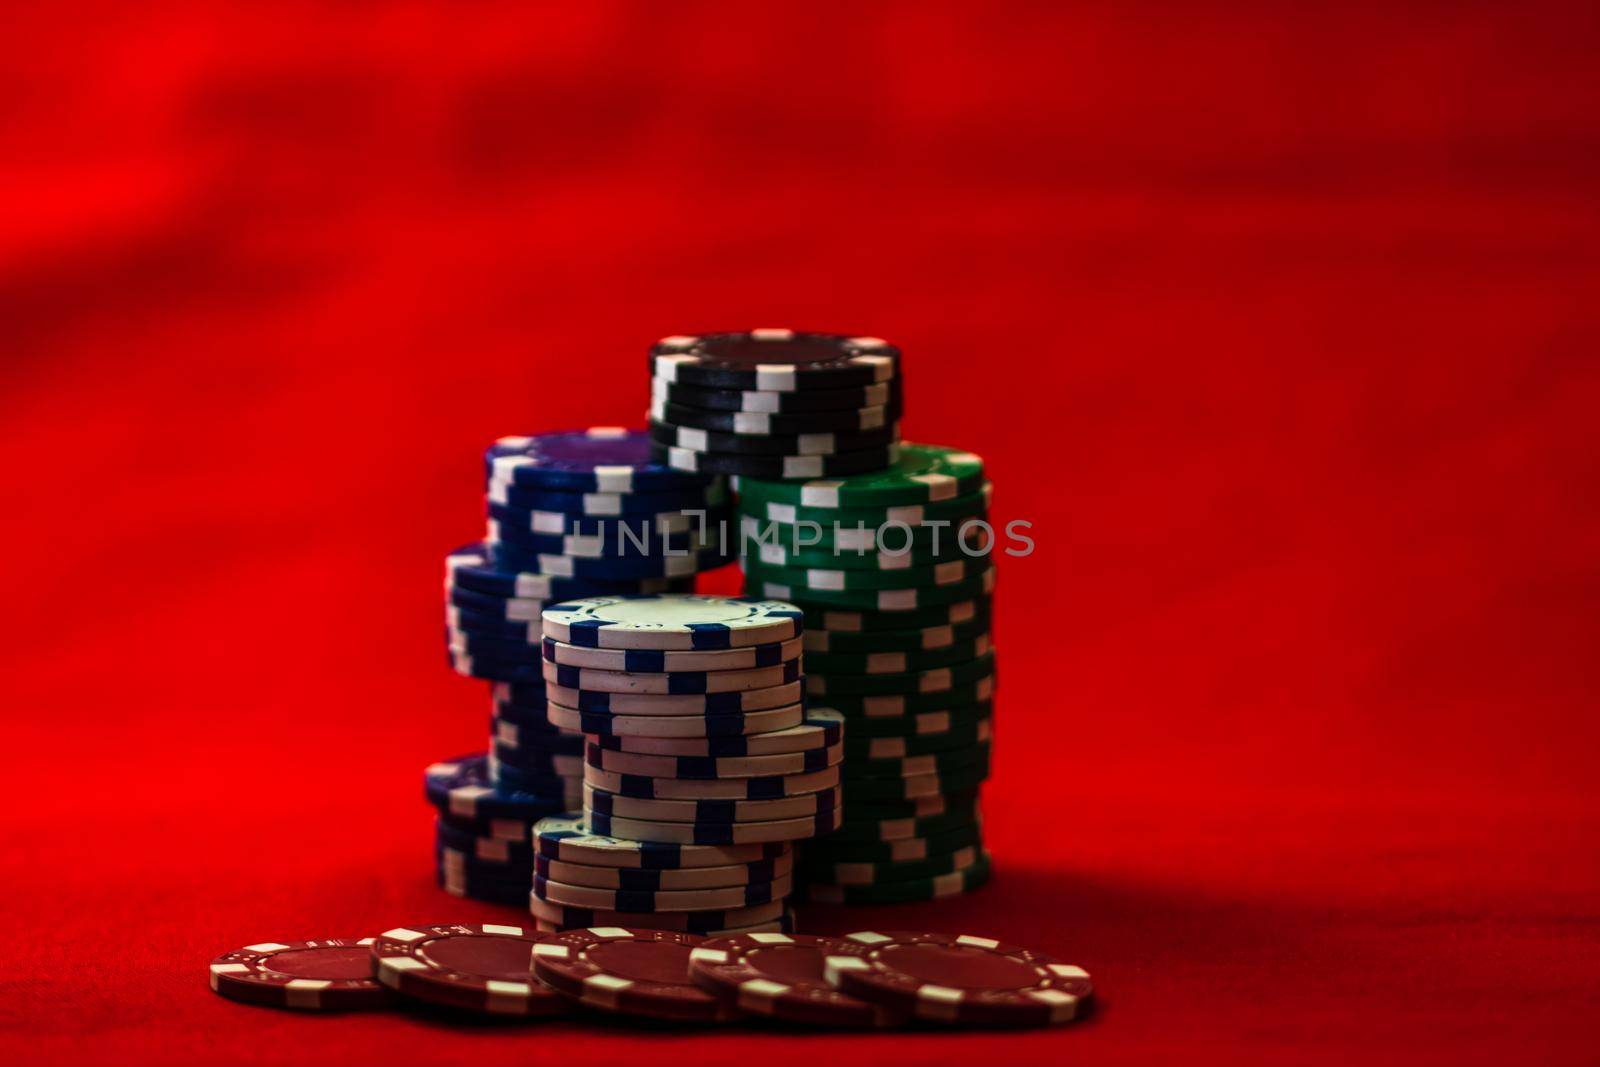 Mix of poker chips on red background by vladispas